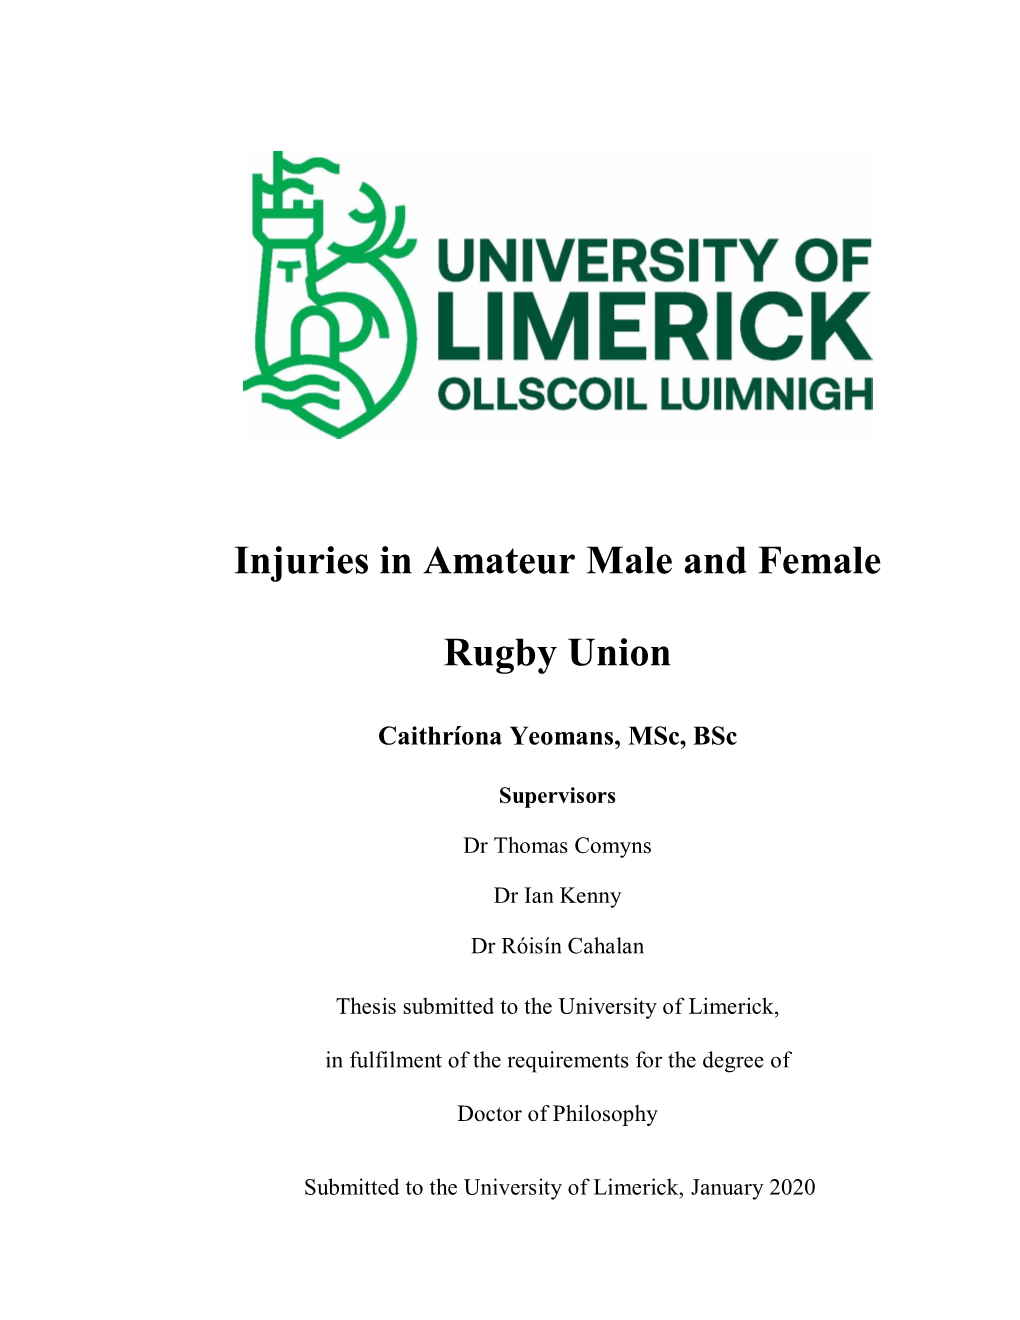 Injuries in Amateur Male and Female Rugby Union